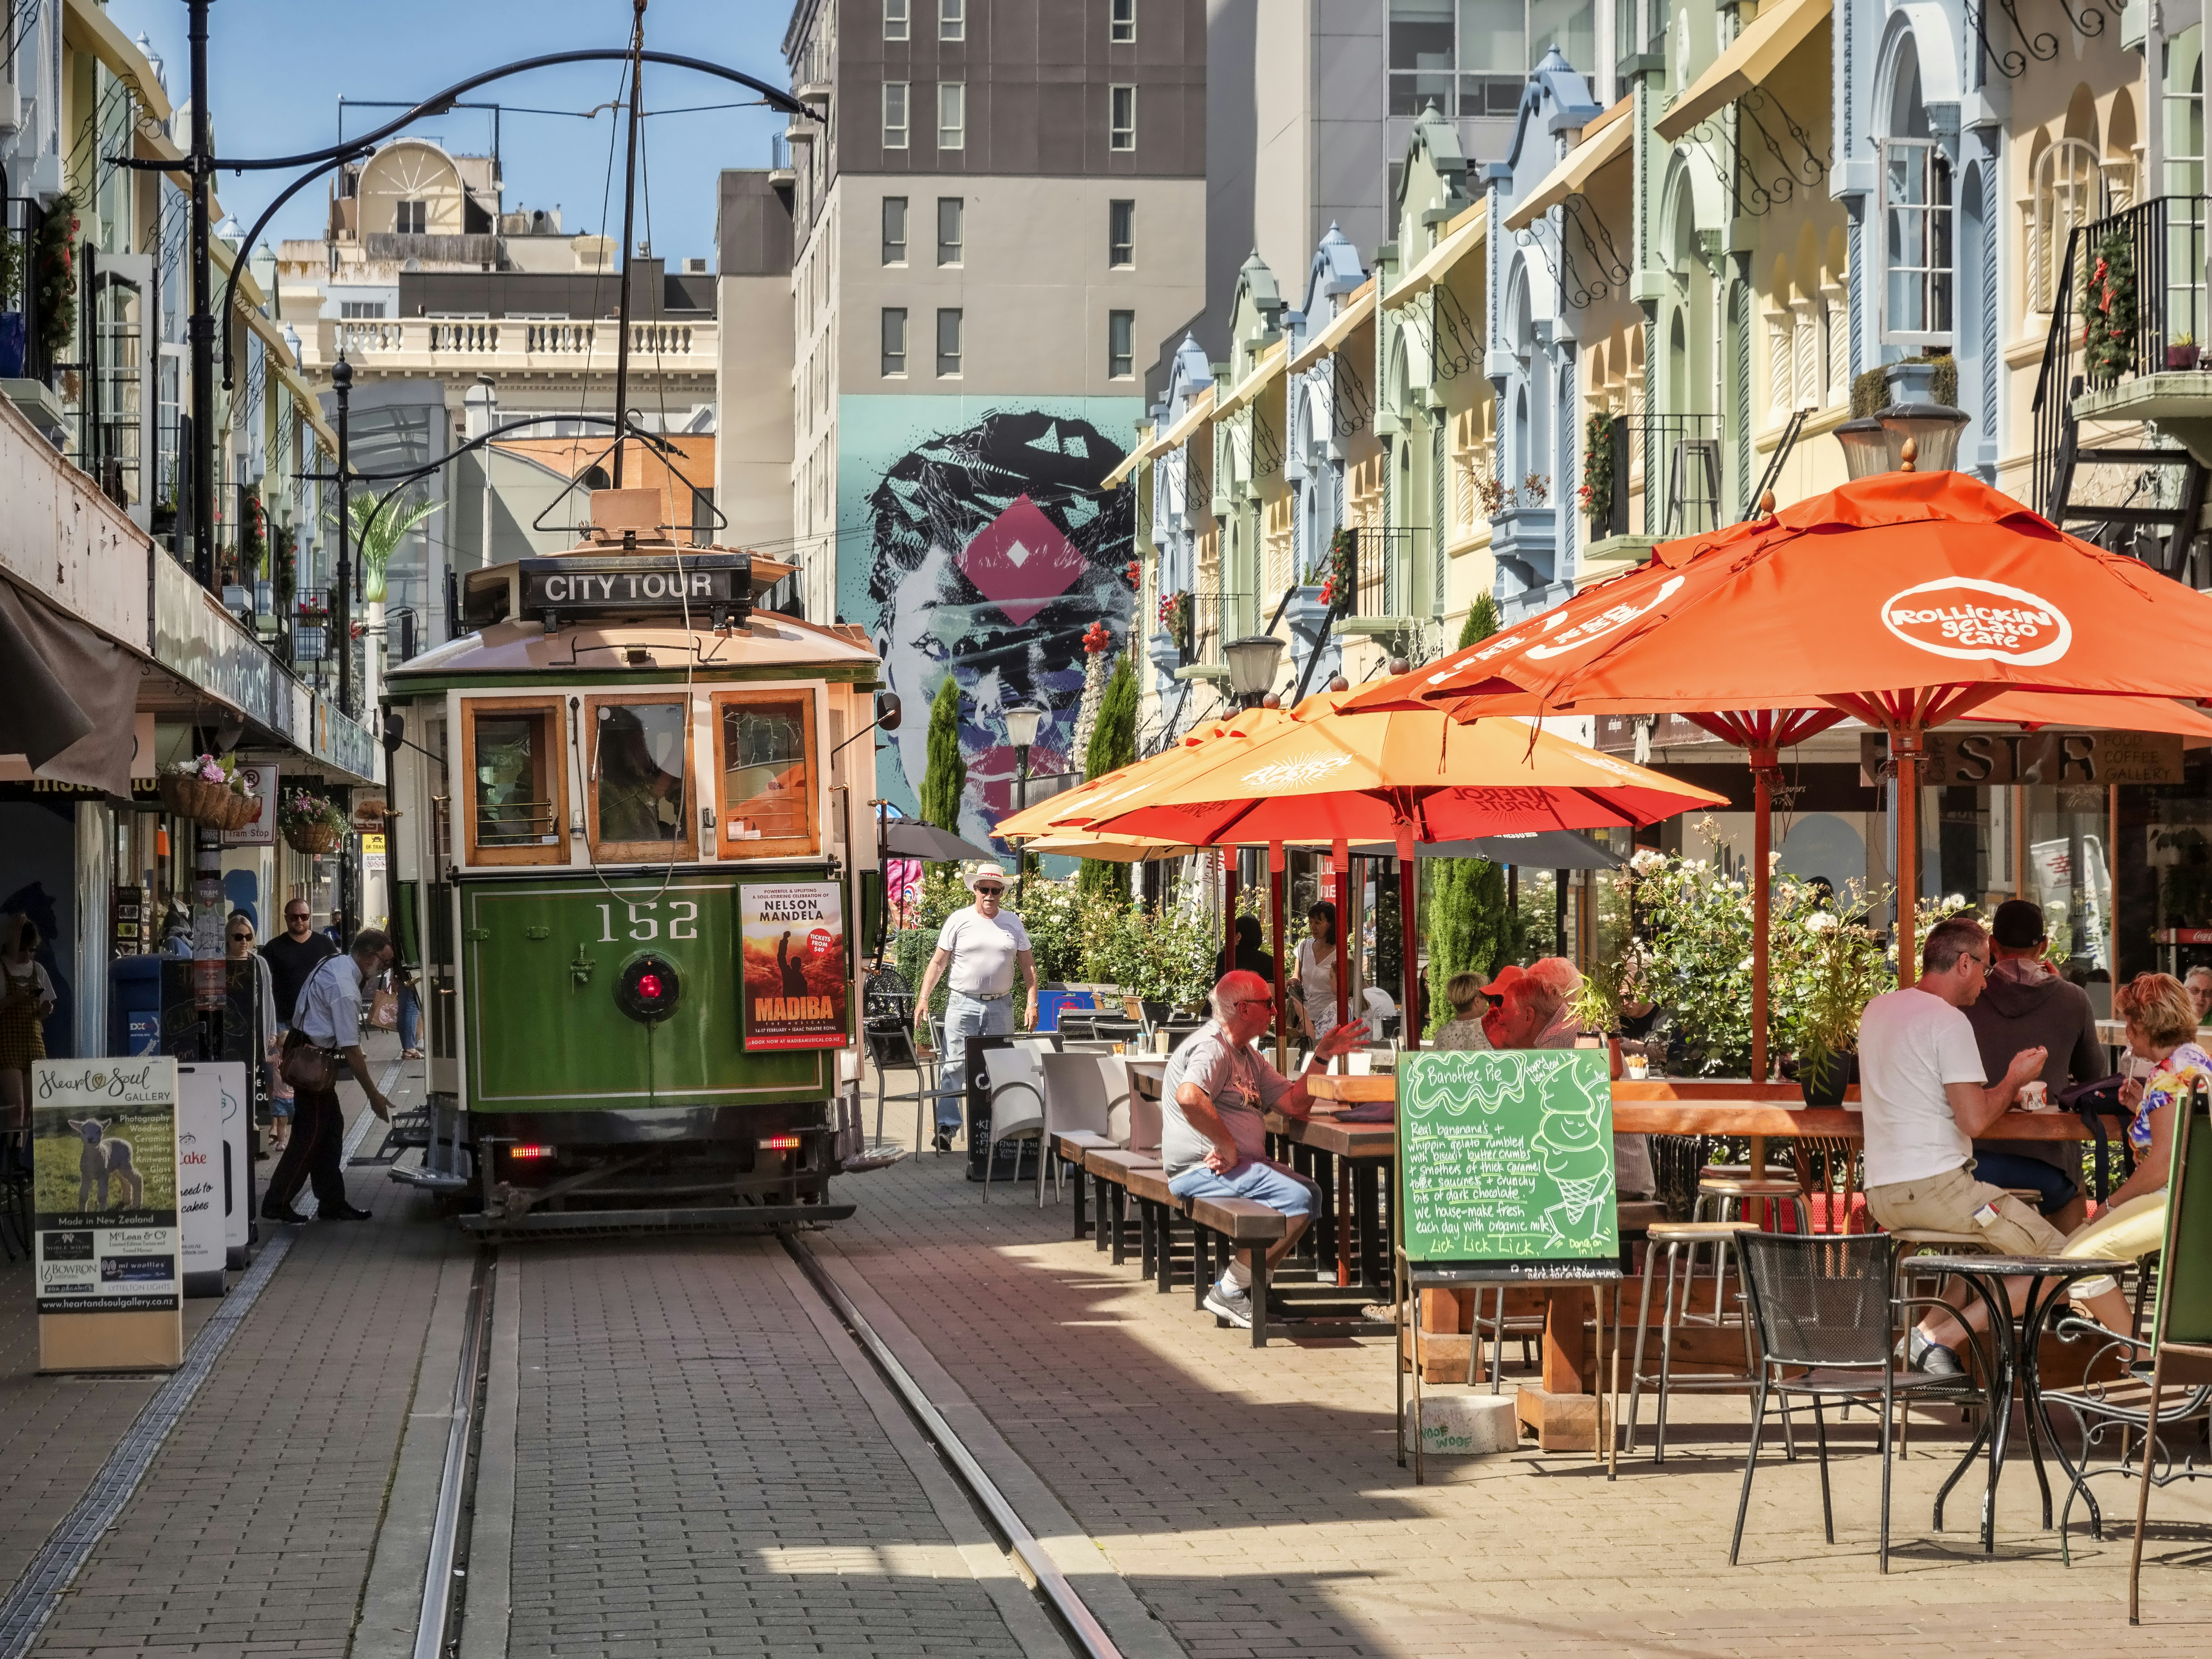 3 January 2019: Christchurch, New Zealand - New Regent Street in the centre of Christchurch, with outdoor cafes and speciality shops, and the tram route running through it.